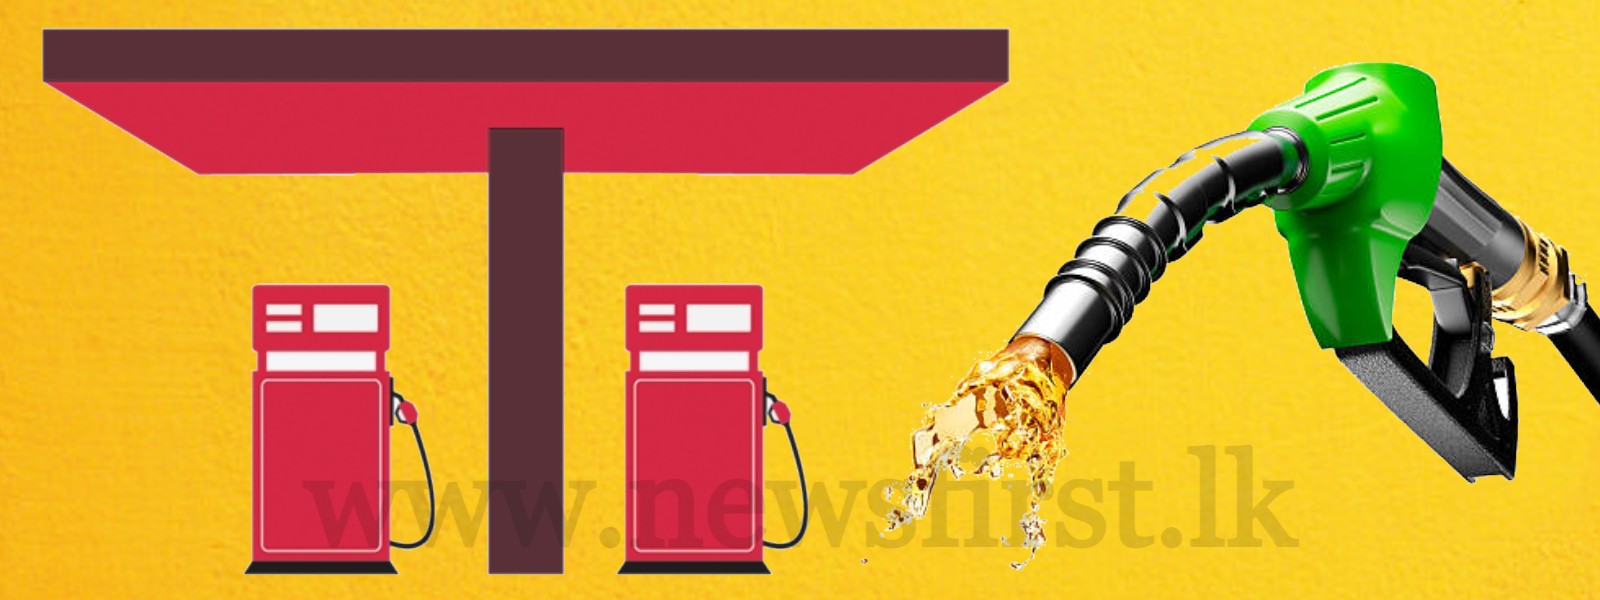 Petrol & Diesel can be sold for Rs. 250/- ; PUCSL Chief tells COPE